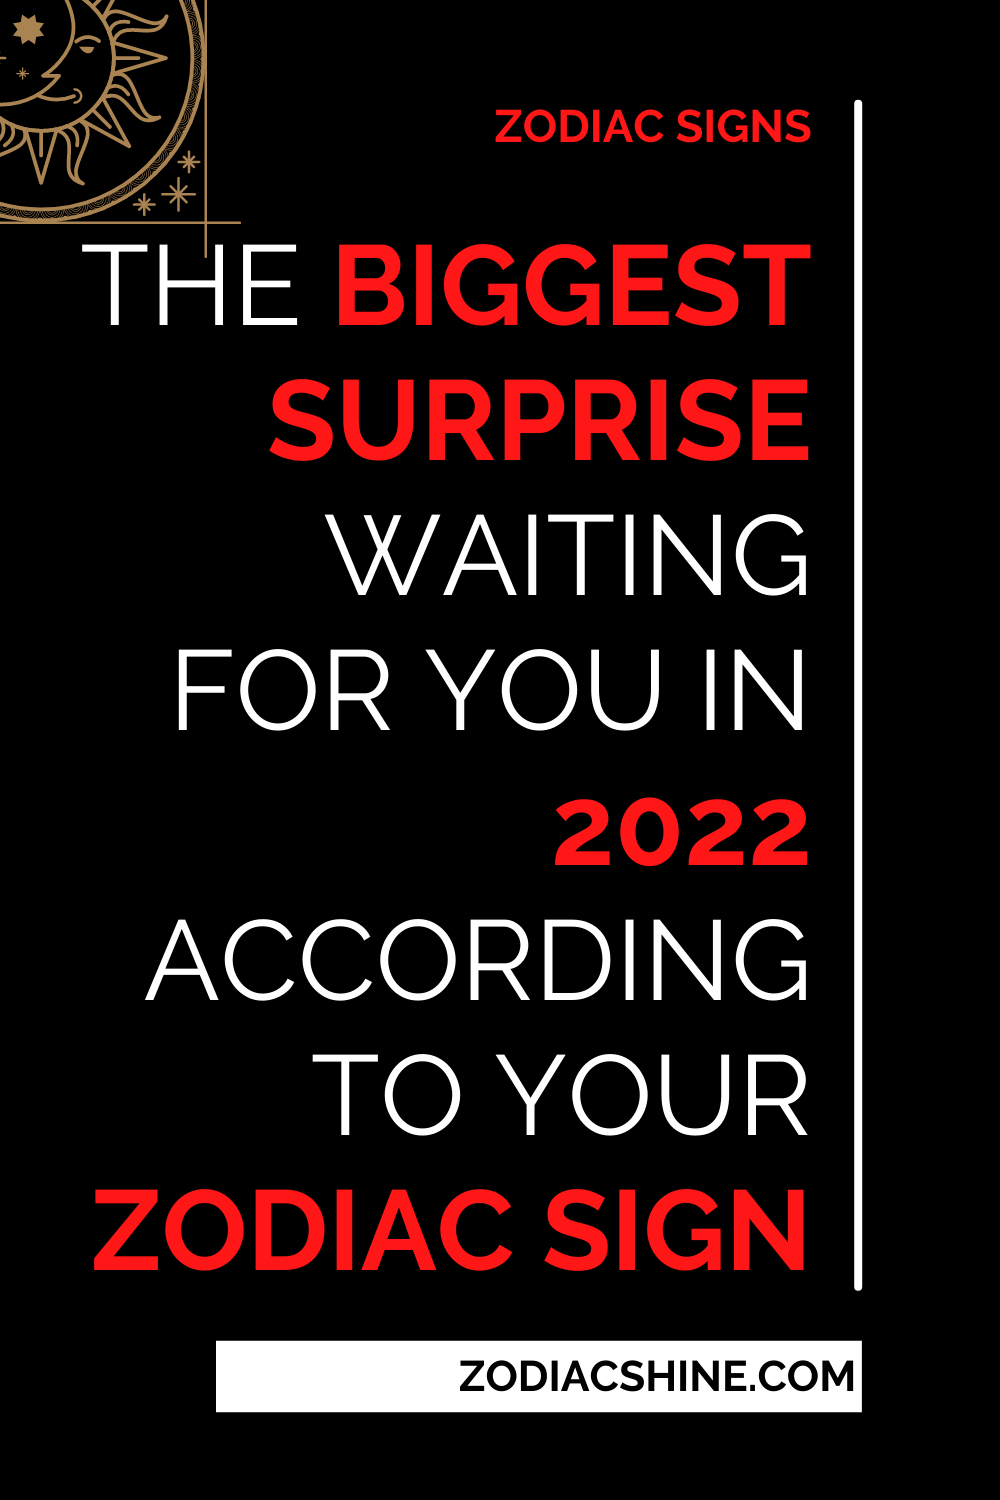 The Biggest Surprise Waiting For You In 2022 According To Your Zodiac Sign